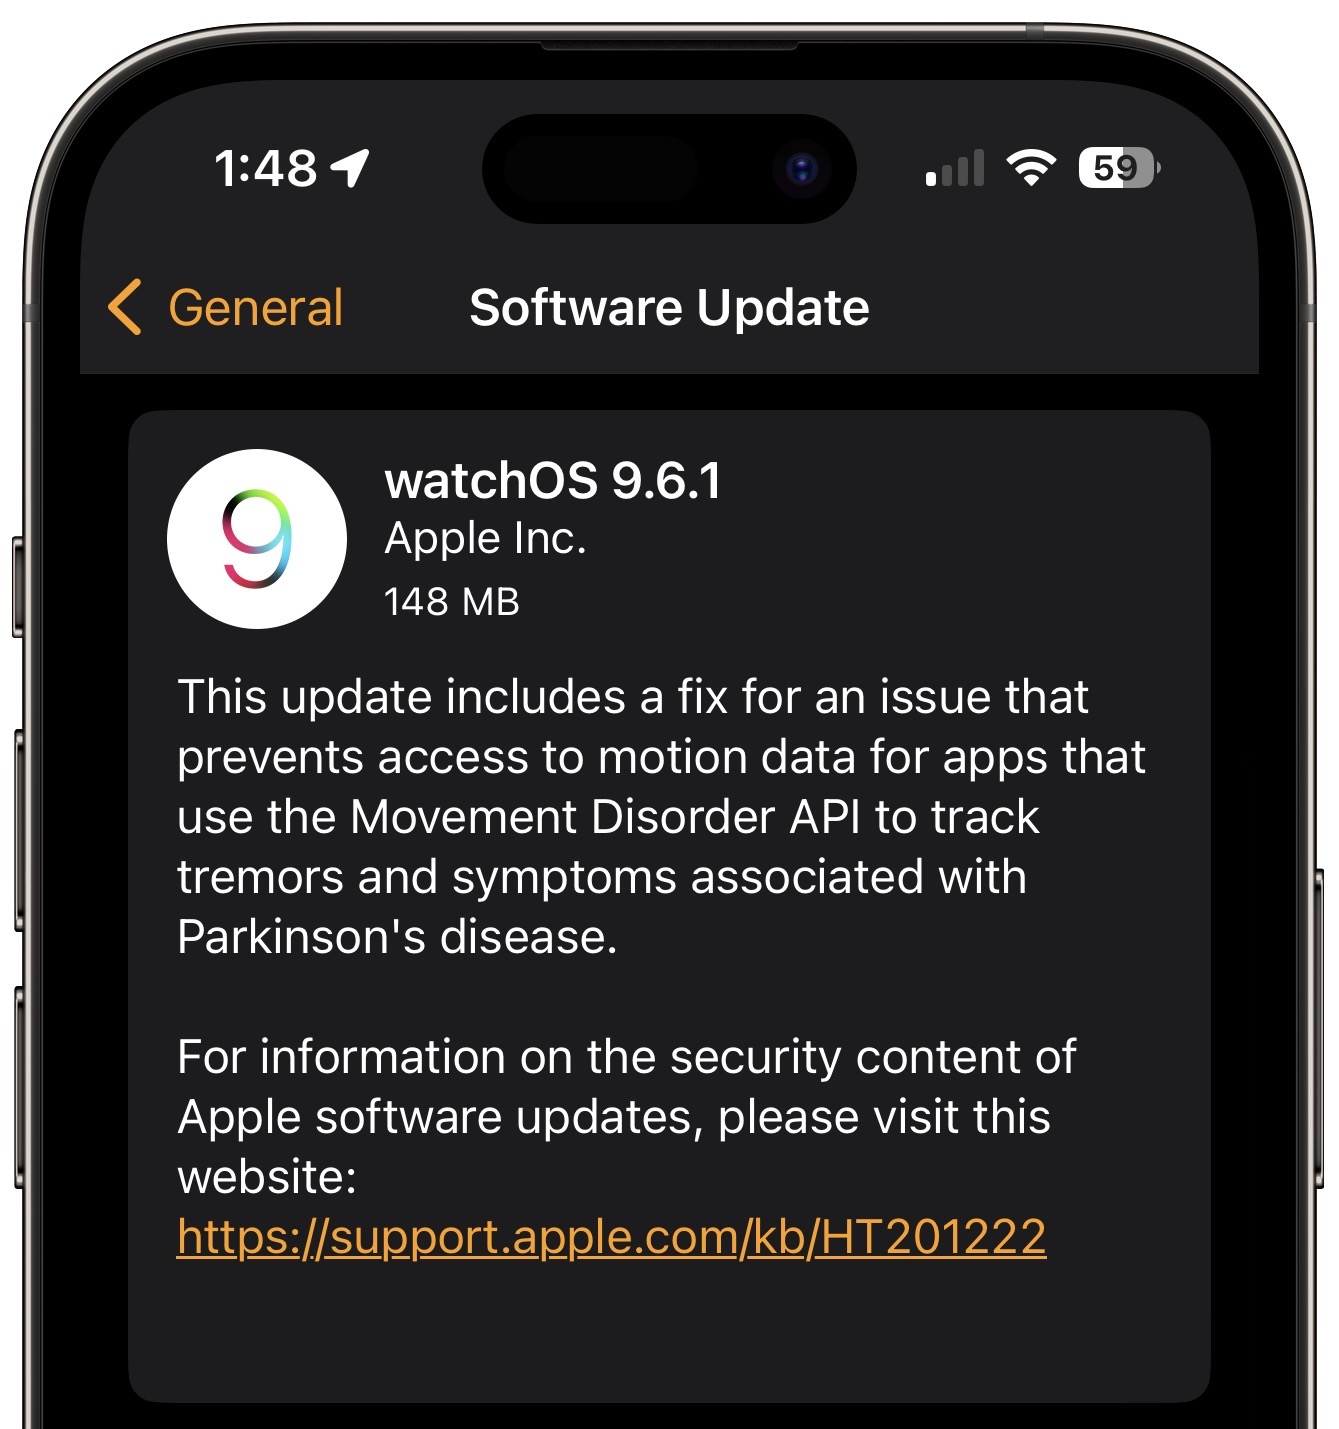 watchOS 9.6.1 release notes
